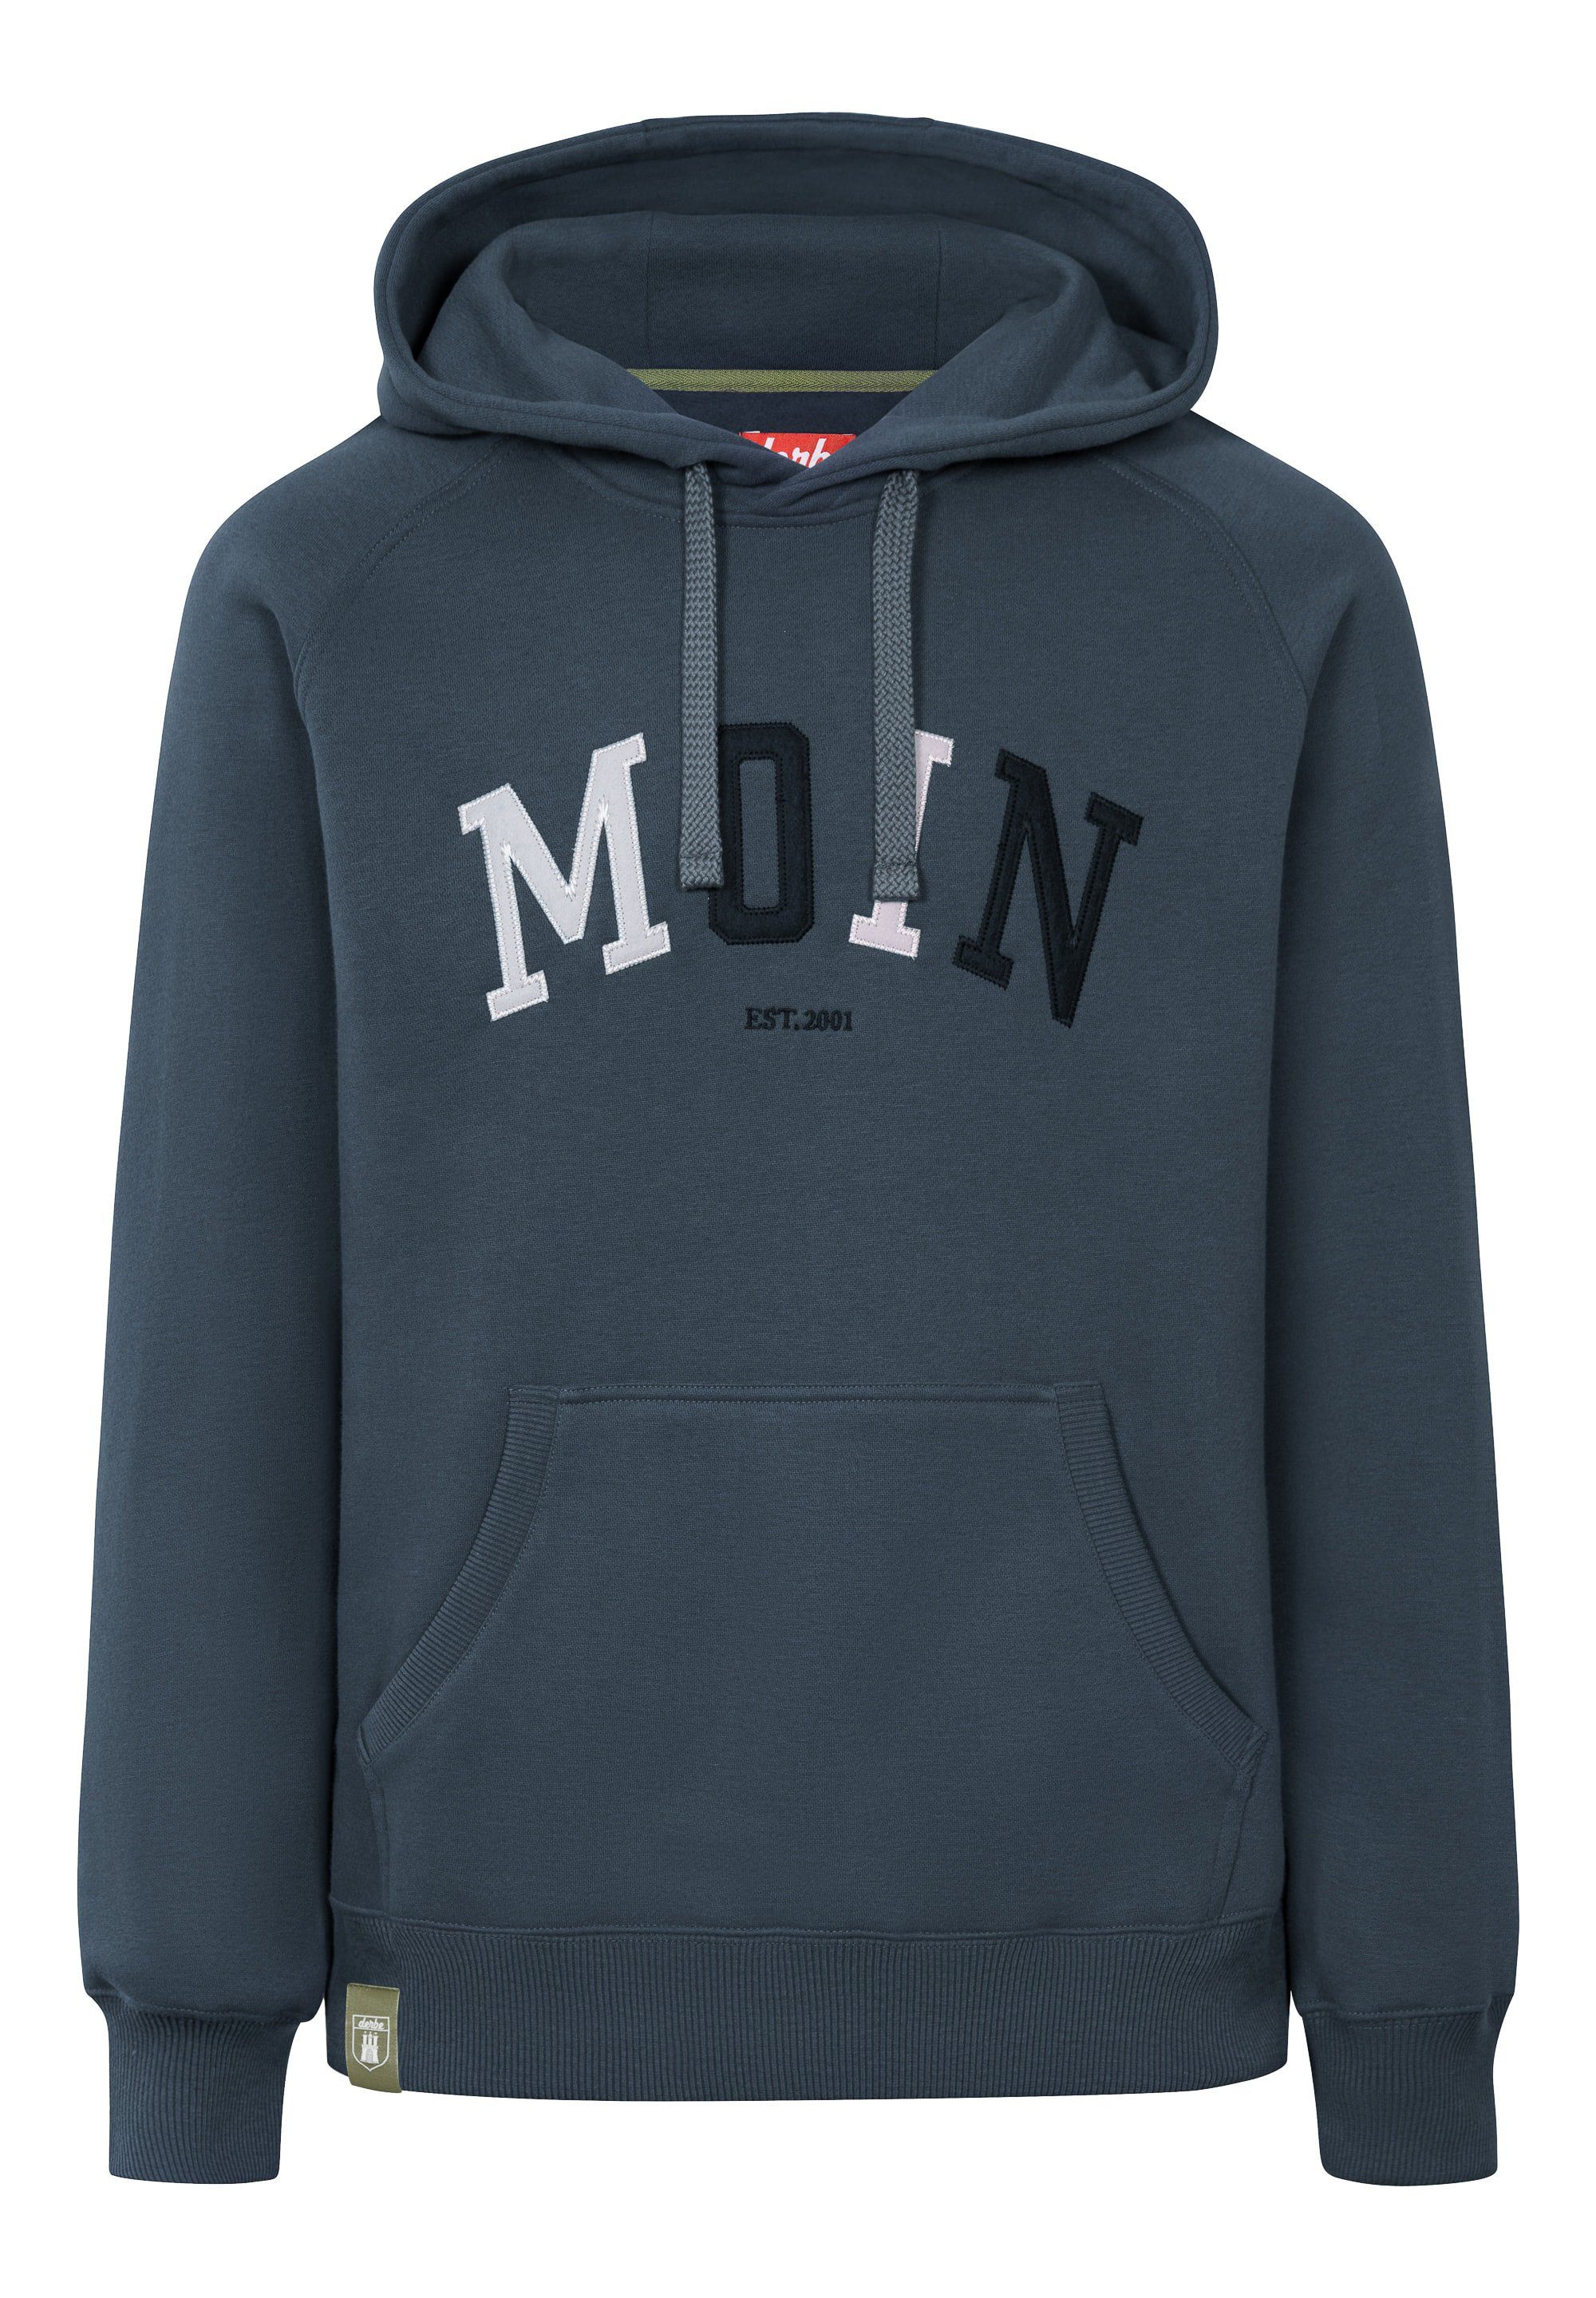 Derbe Sweatshirt Moin BC Made in Portugal, superweiches Material navy